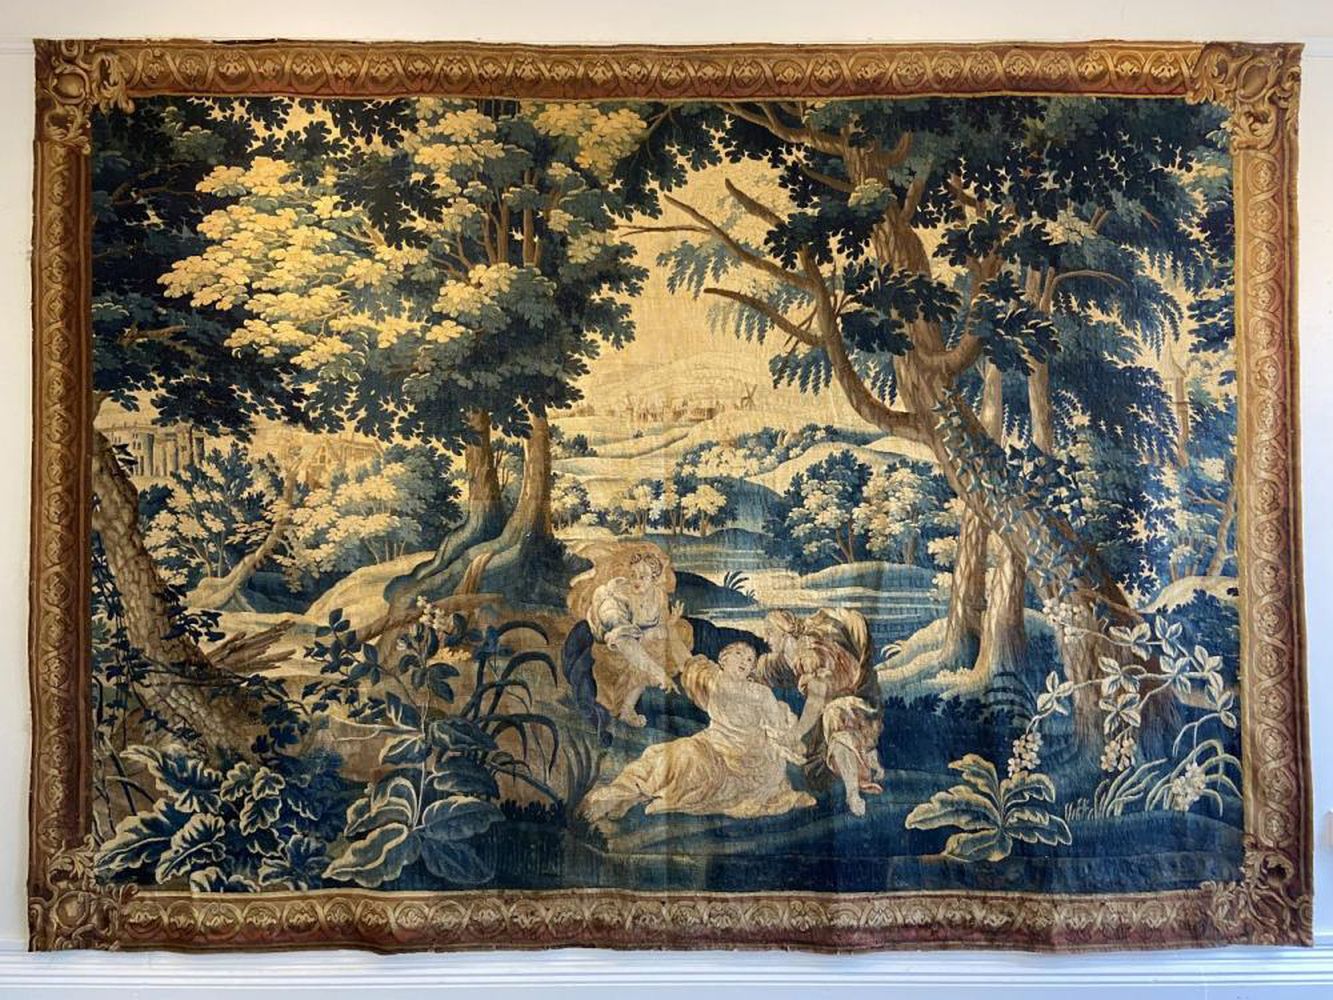 LATE 17TH-CENTURY FLEMISH TAPESTRY